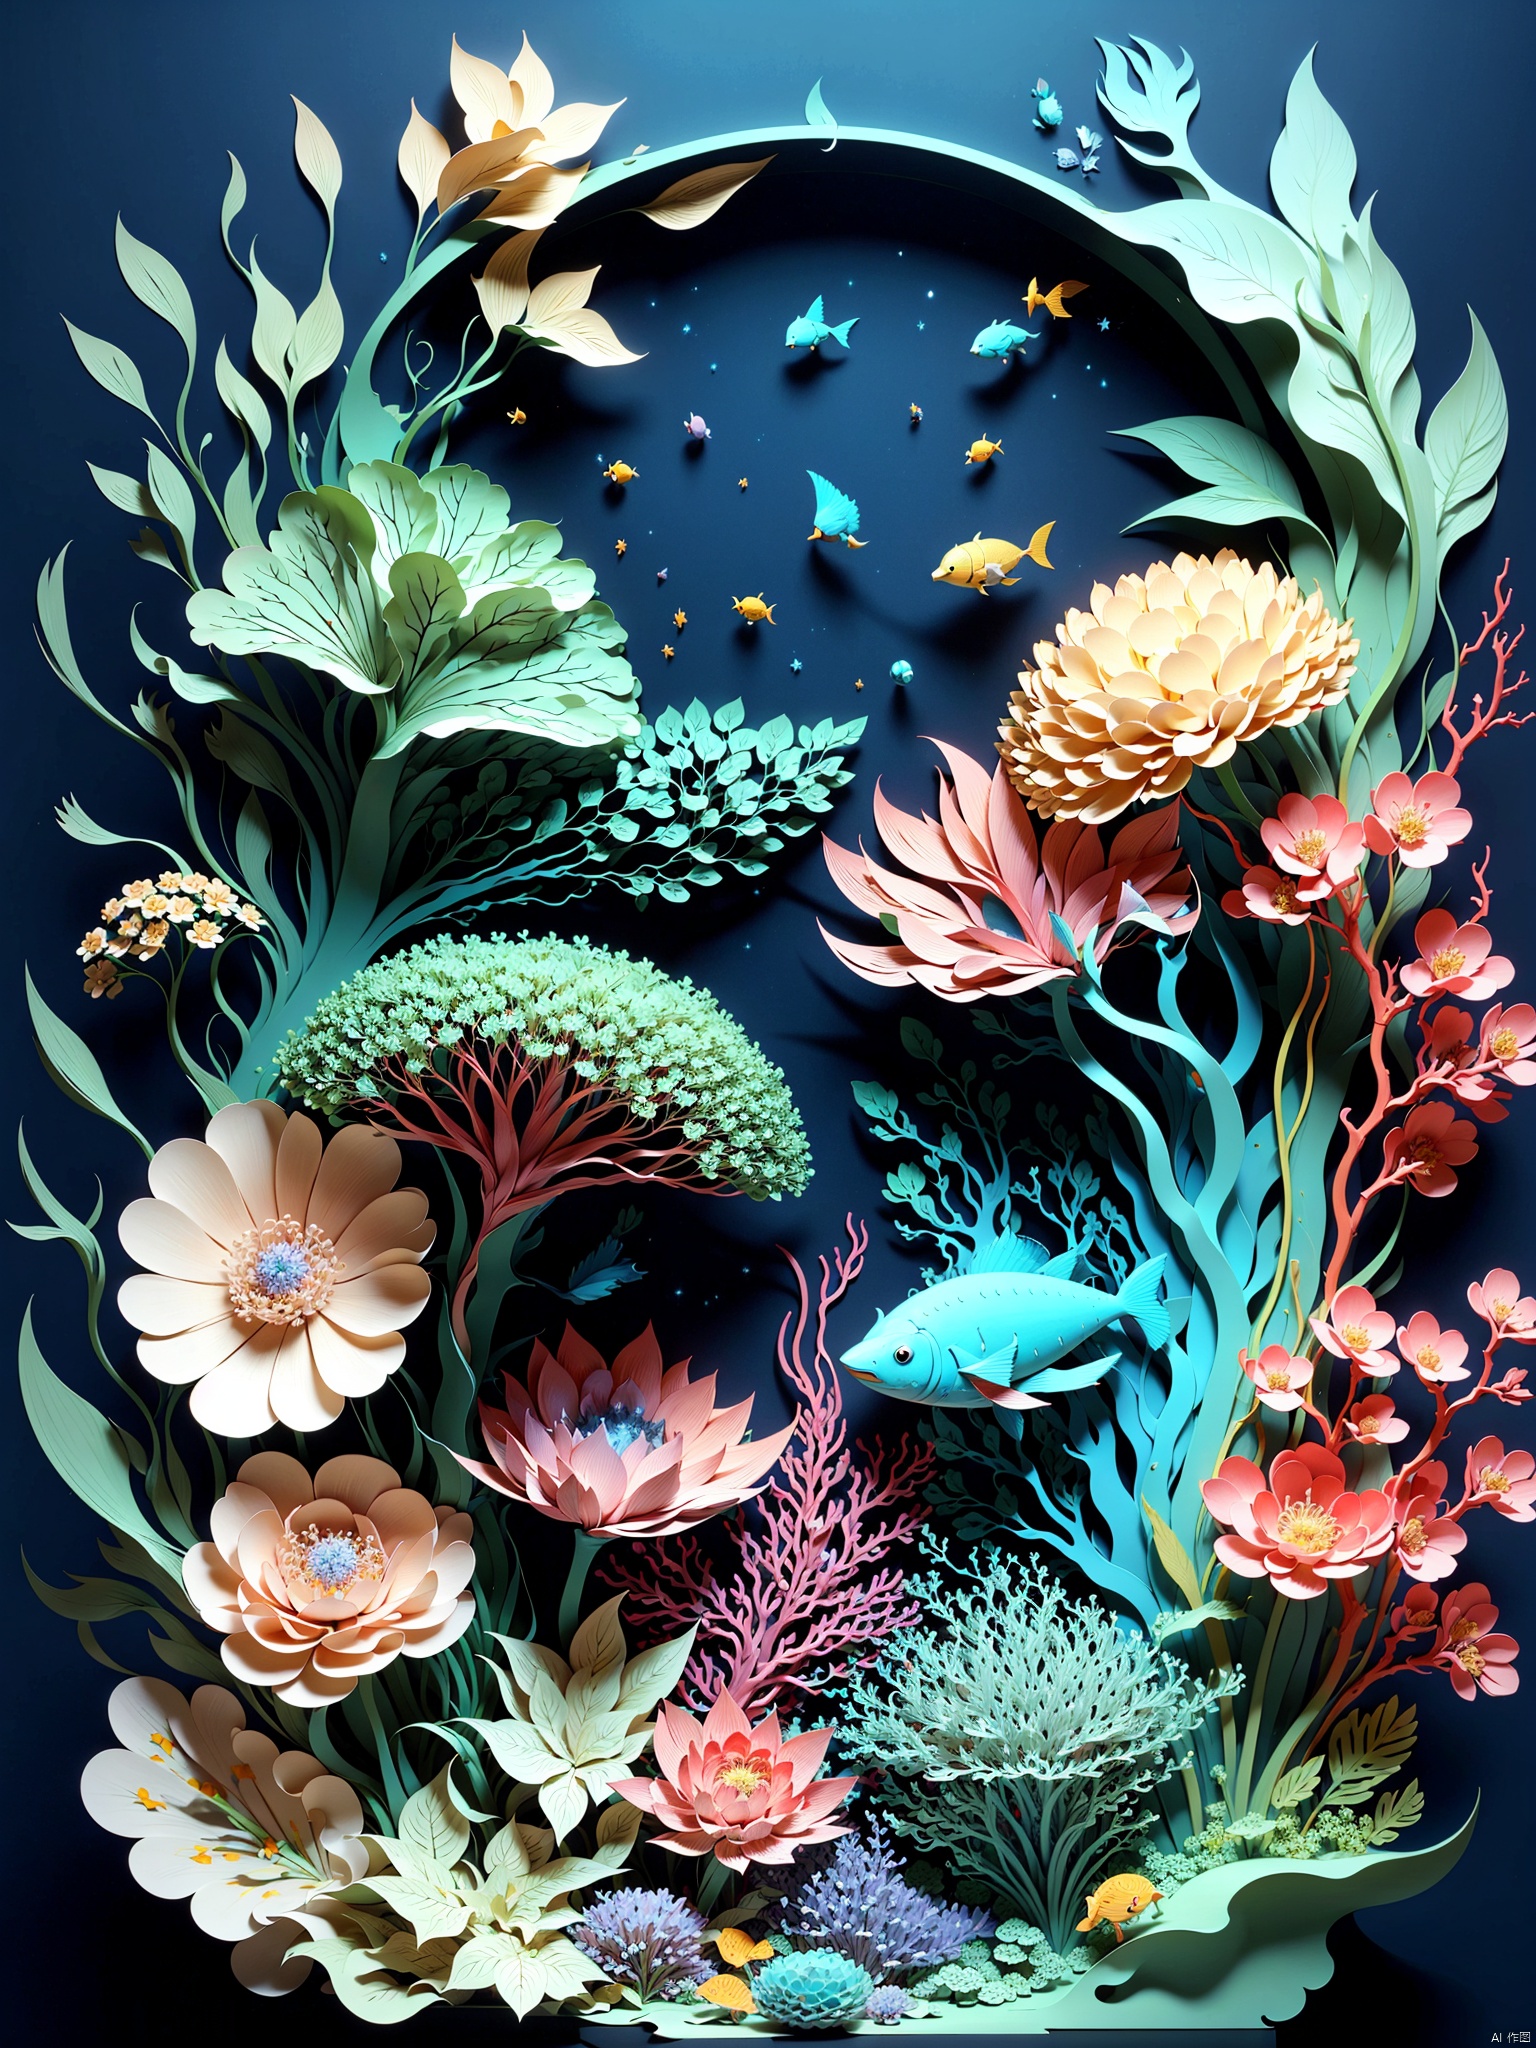 Marmaid, blue, foam, singing, master's work, best quality, (very detailed CG unified 8k wallpaper), (best quality), (best illustration), (best shadow), luminous spirit, luminous deer, Japanese theme elements. Mysterious deep sea, beautiful ocean, surrounded by flowers, delicate leaves and branches surrounded by fireflies (natural elements), (jungle theme), (crystals), (pearls), (clouds and mist), (particle effects) and other 3D, Octane rendering, ray tracing, ultra fine -- v6,Paper Cuttings style,